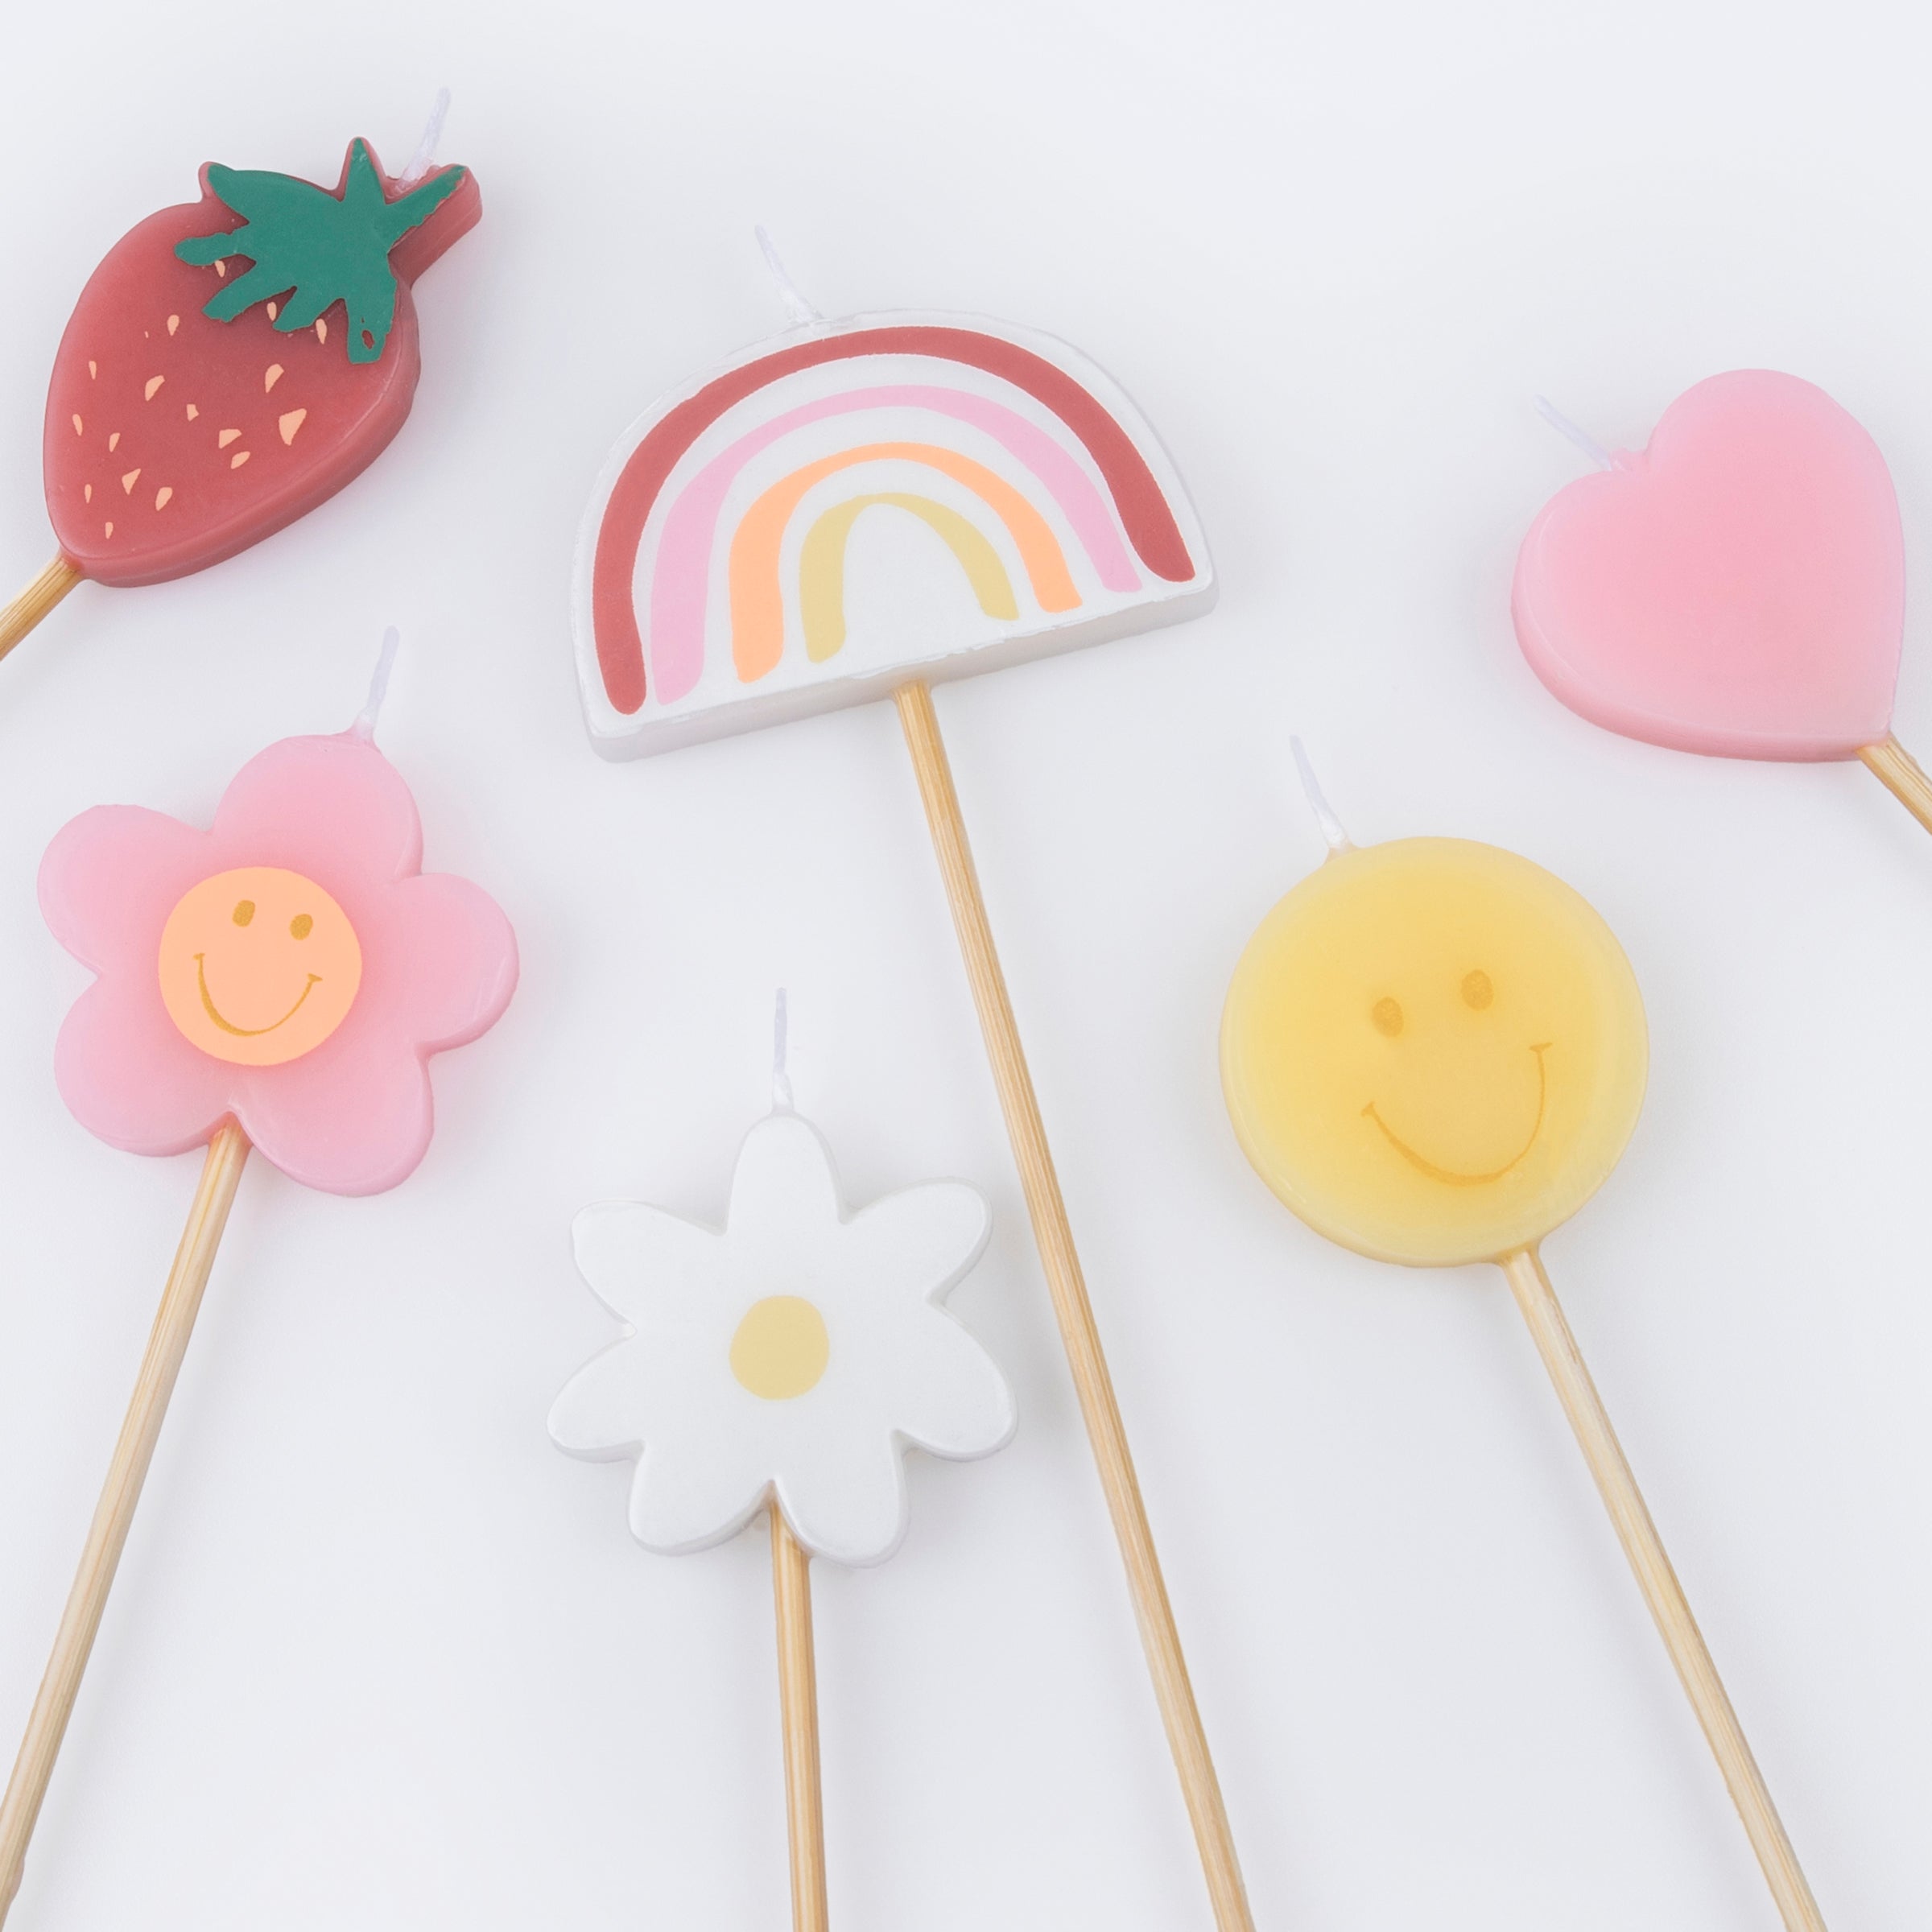 If you're looking for birthday candles in cheerful colors you'll love our happy face collection.